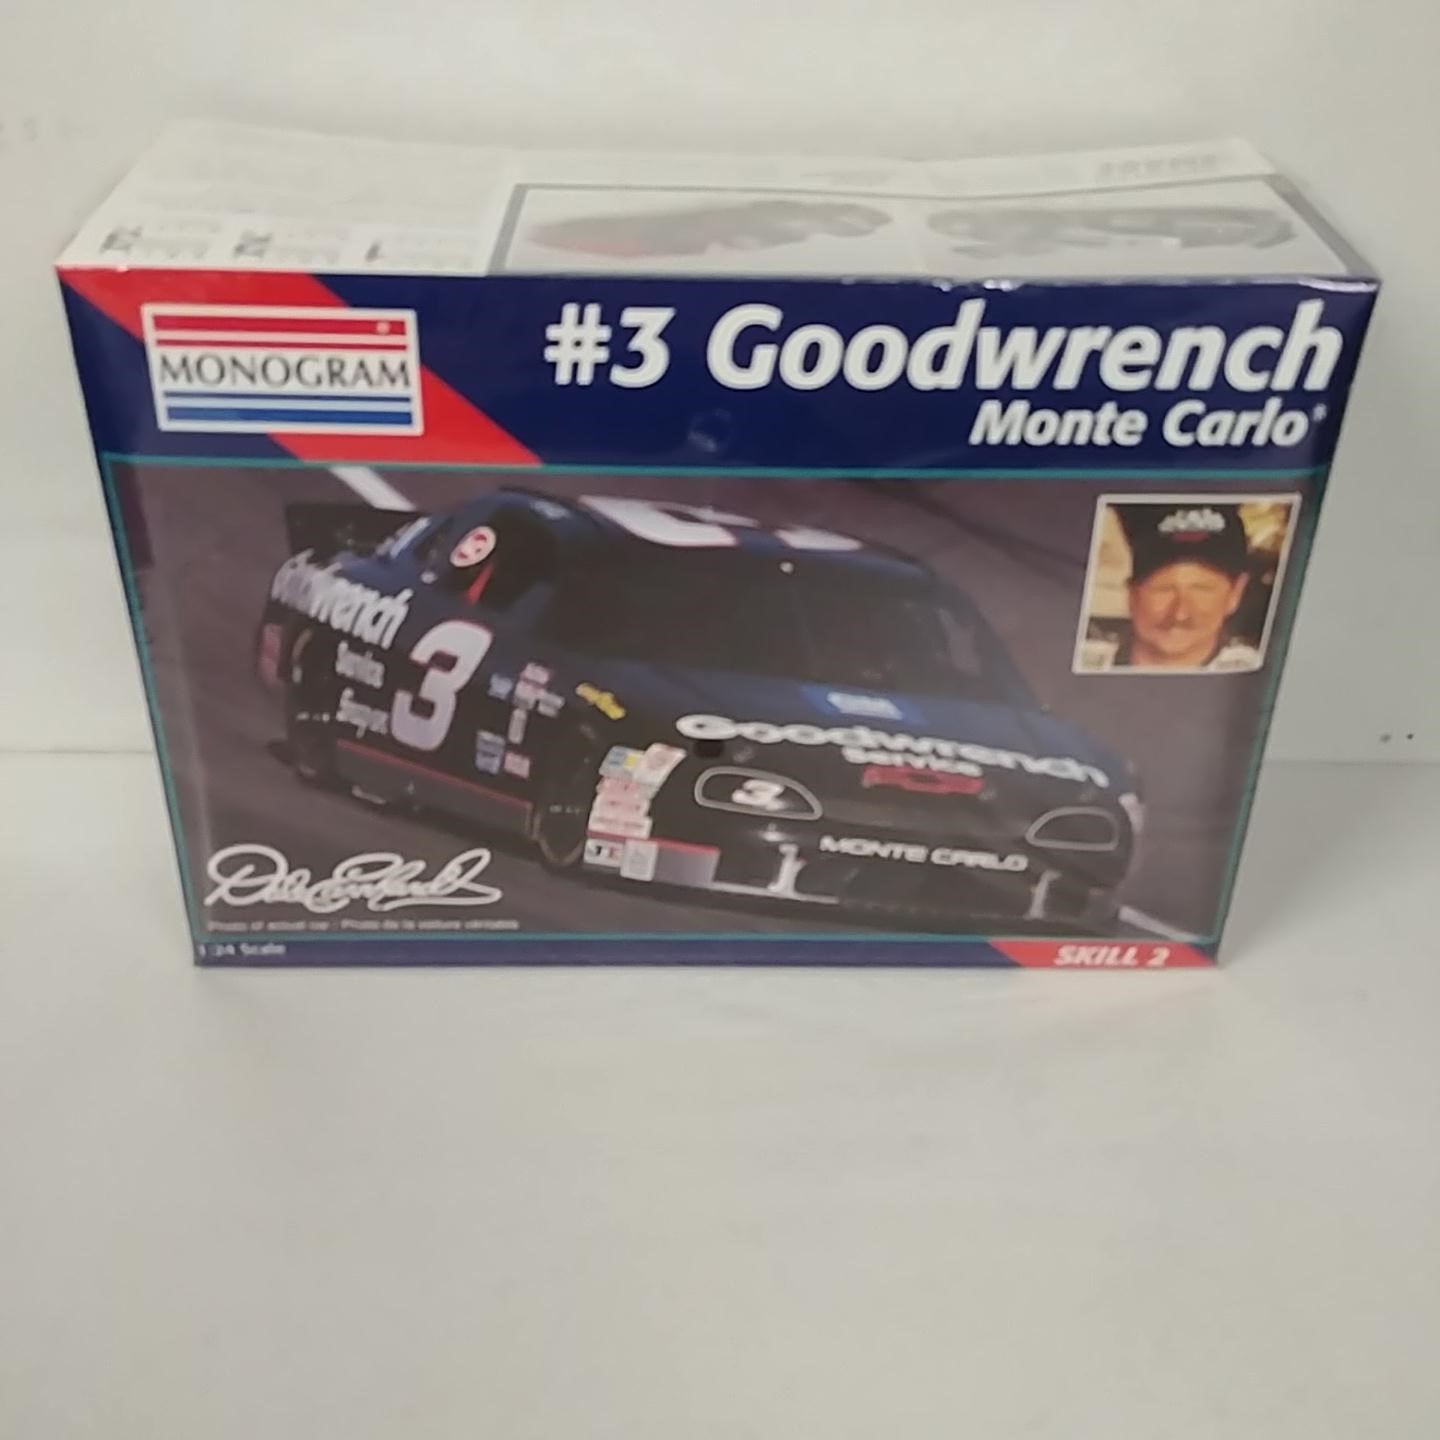 1995 Dale Earnhardt 1/24th GM Goodwrench Monte Carlo model kit by Monogram